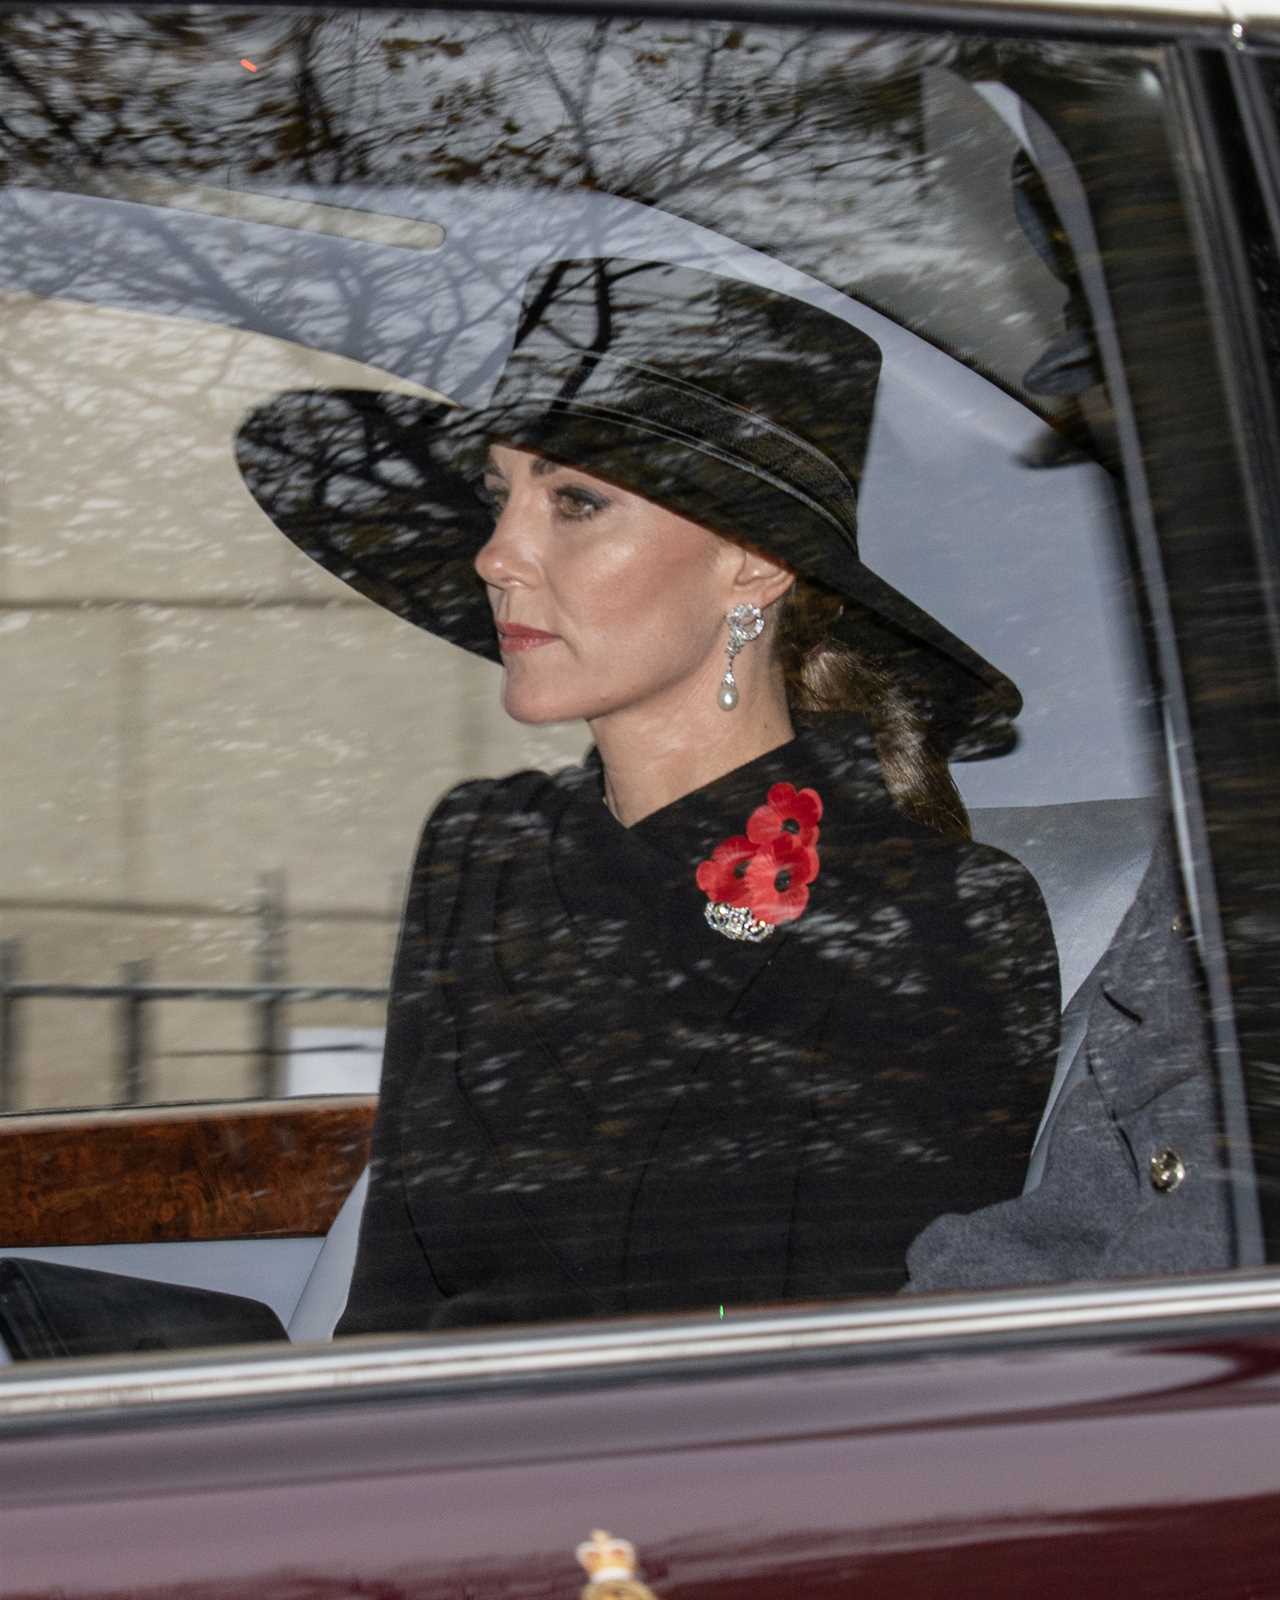 Prince William & Kate Middleton arrive at Remembrance Sunday service with King Charles to lead first ceremony as monarch